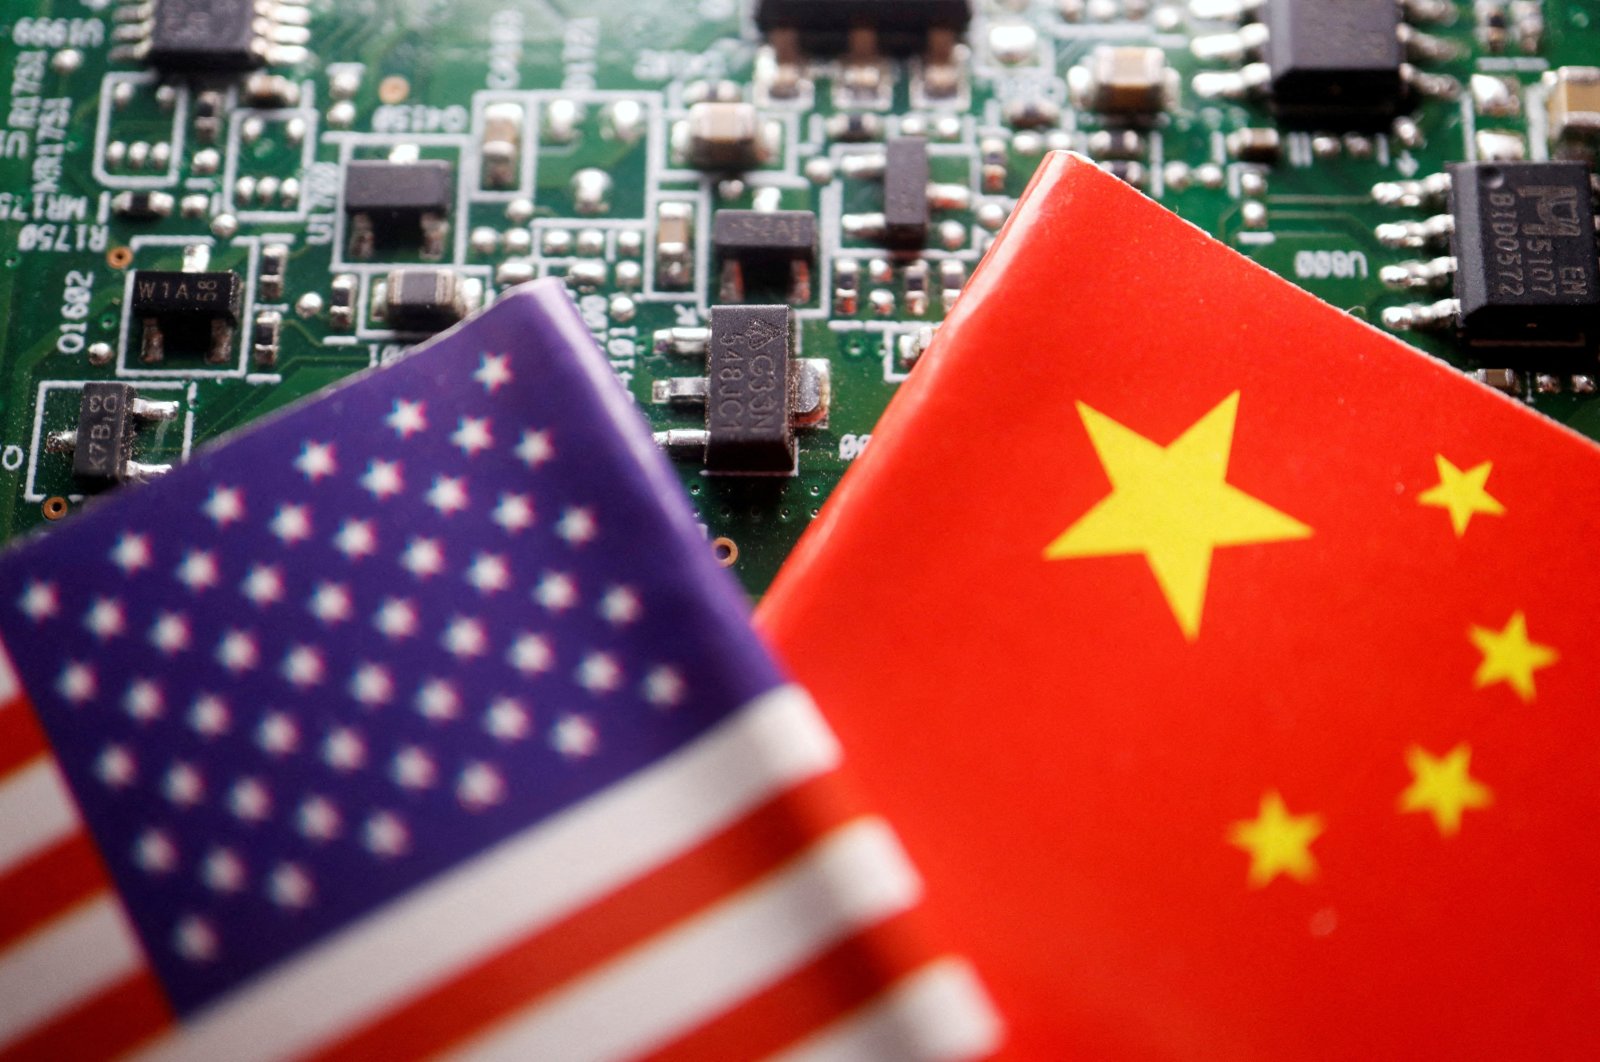 The flags of China and the U.S. are displayed on a printed circuit board with semiconductor chips, in this illustration picture taken Feb. 17, 2023. (Reuters Photo)